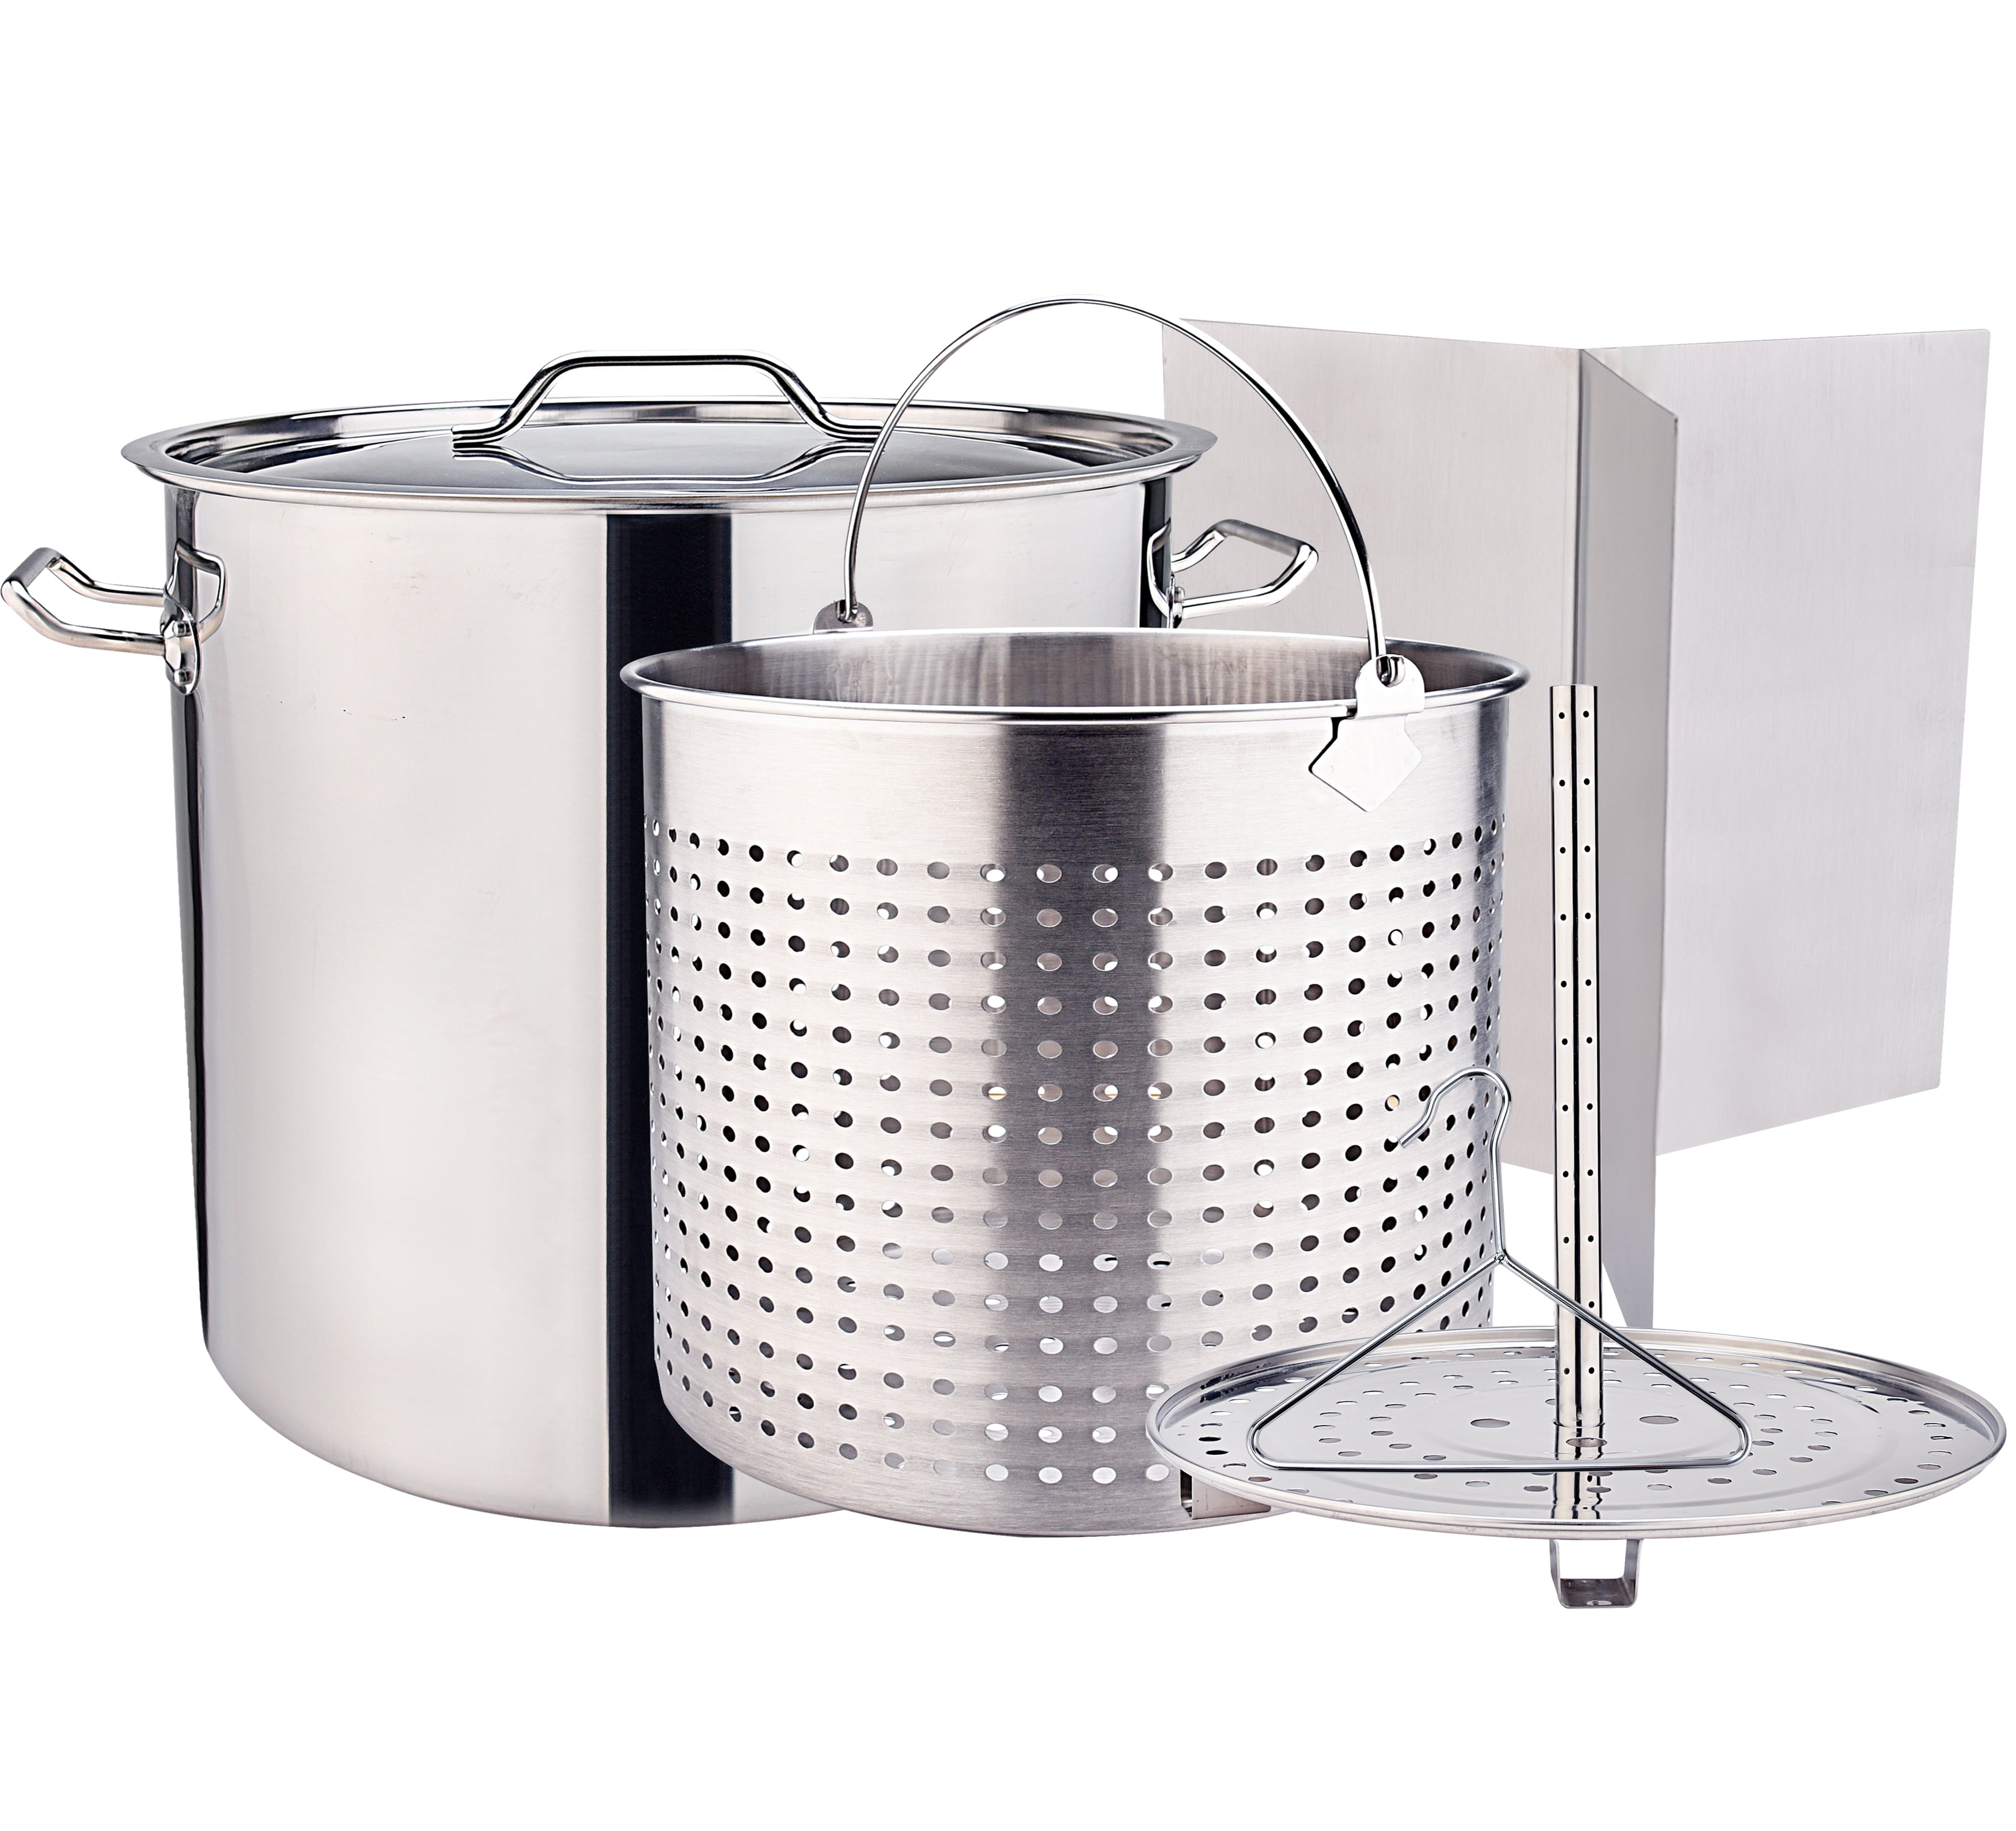 Large Stock Pot with Lid - 9L Heavy Duty Stainless Steel Pot for Soup,  Stew, Seafood, Stock, Canning or Catering - Induction Pot w/Riveted  Anti-heat